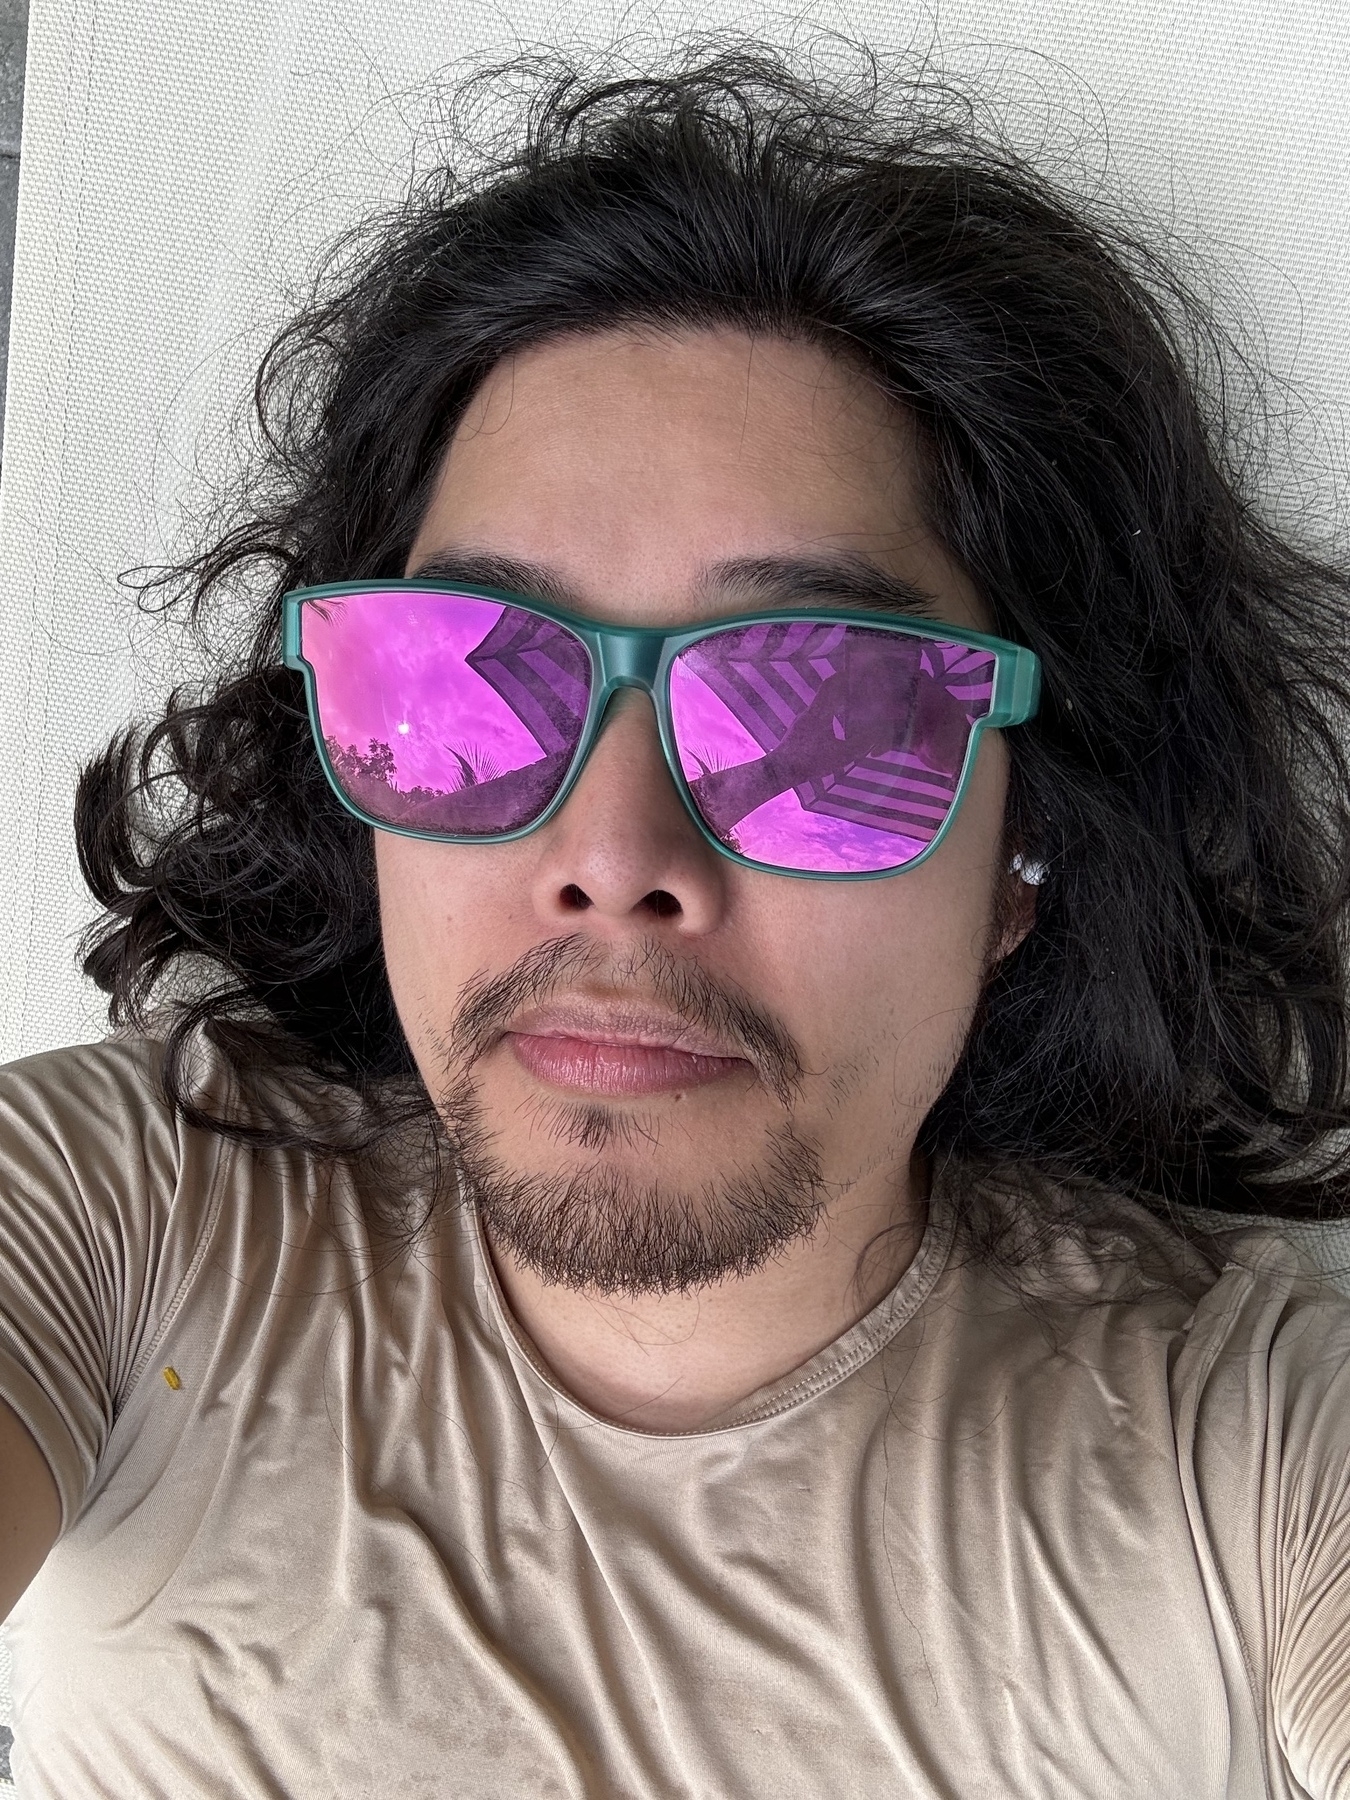 Miguel a masc Filipino man with black hair is looking at the camera with teal sunglasses with mirrored lenses. Not smiling